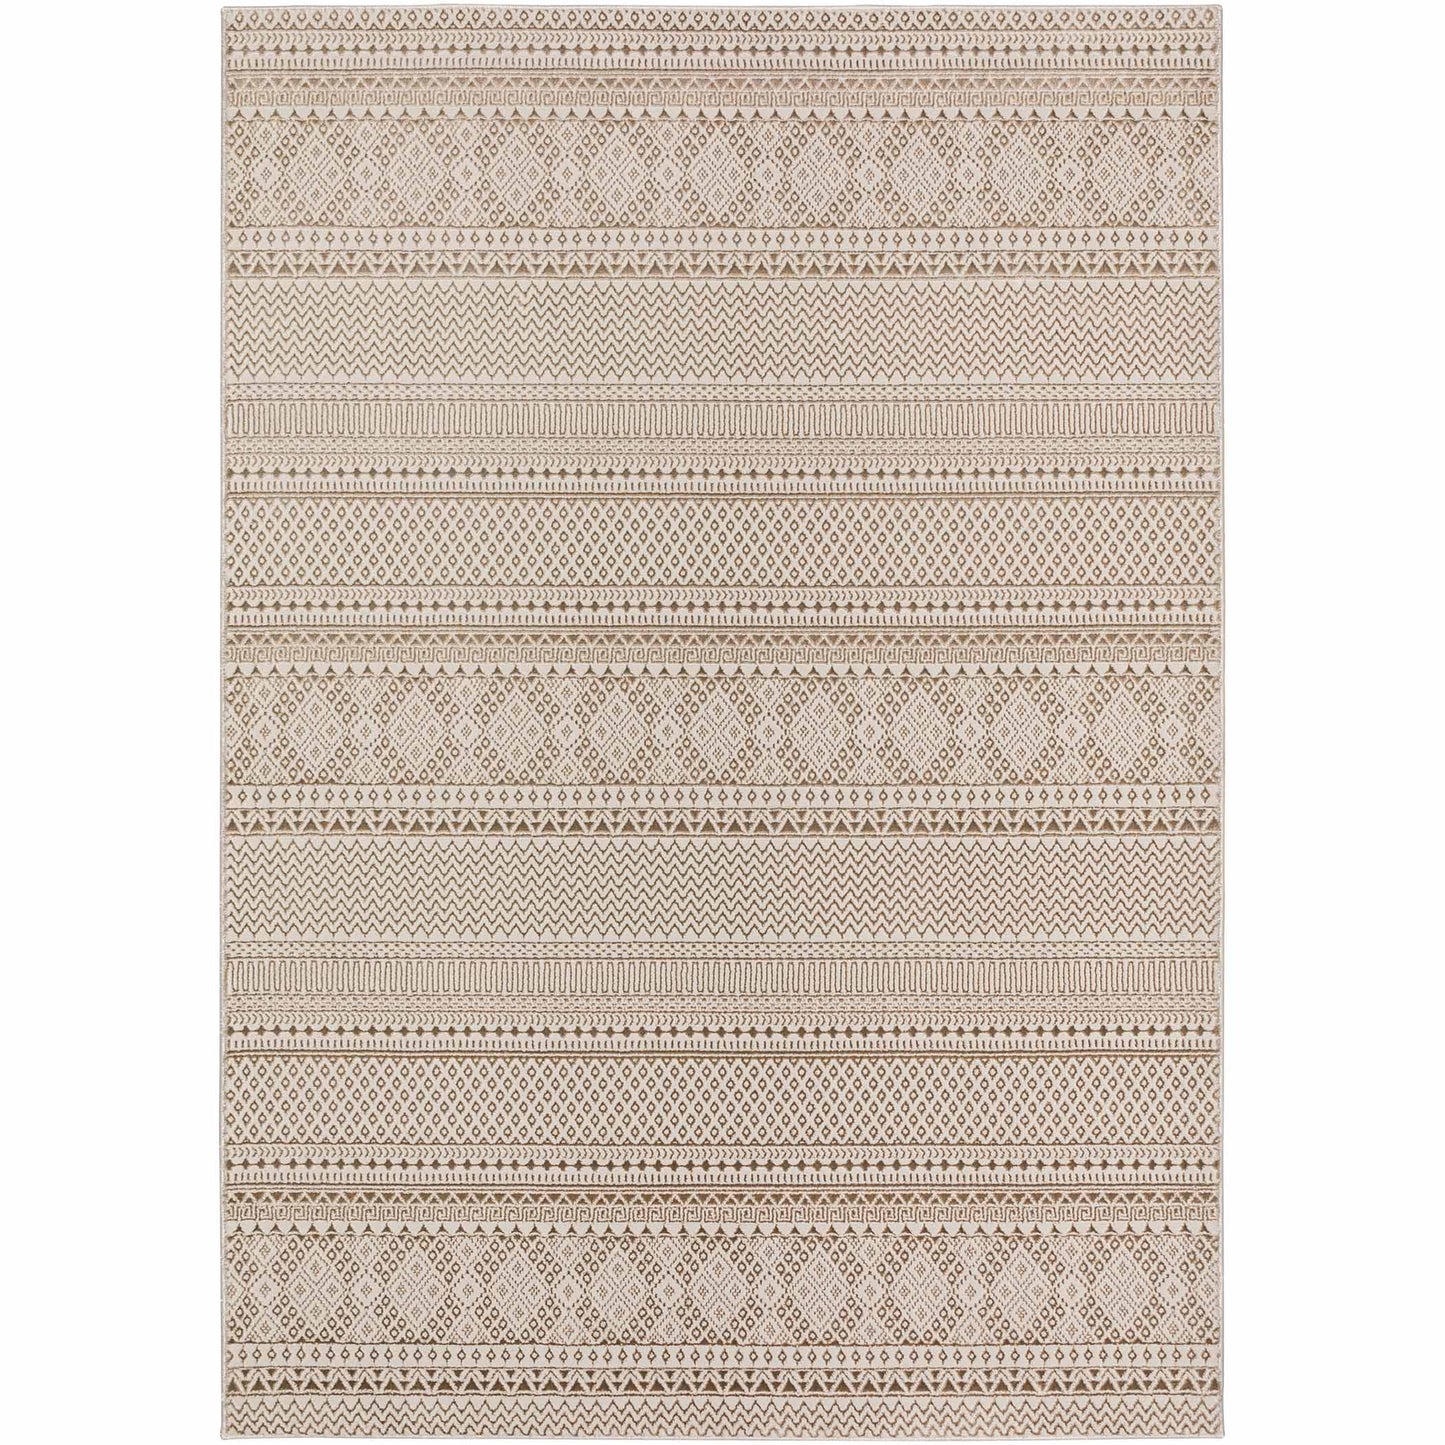 Dalyn Rugs Rhodes RR2 Taupe Transitional Power Woven Rug